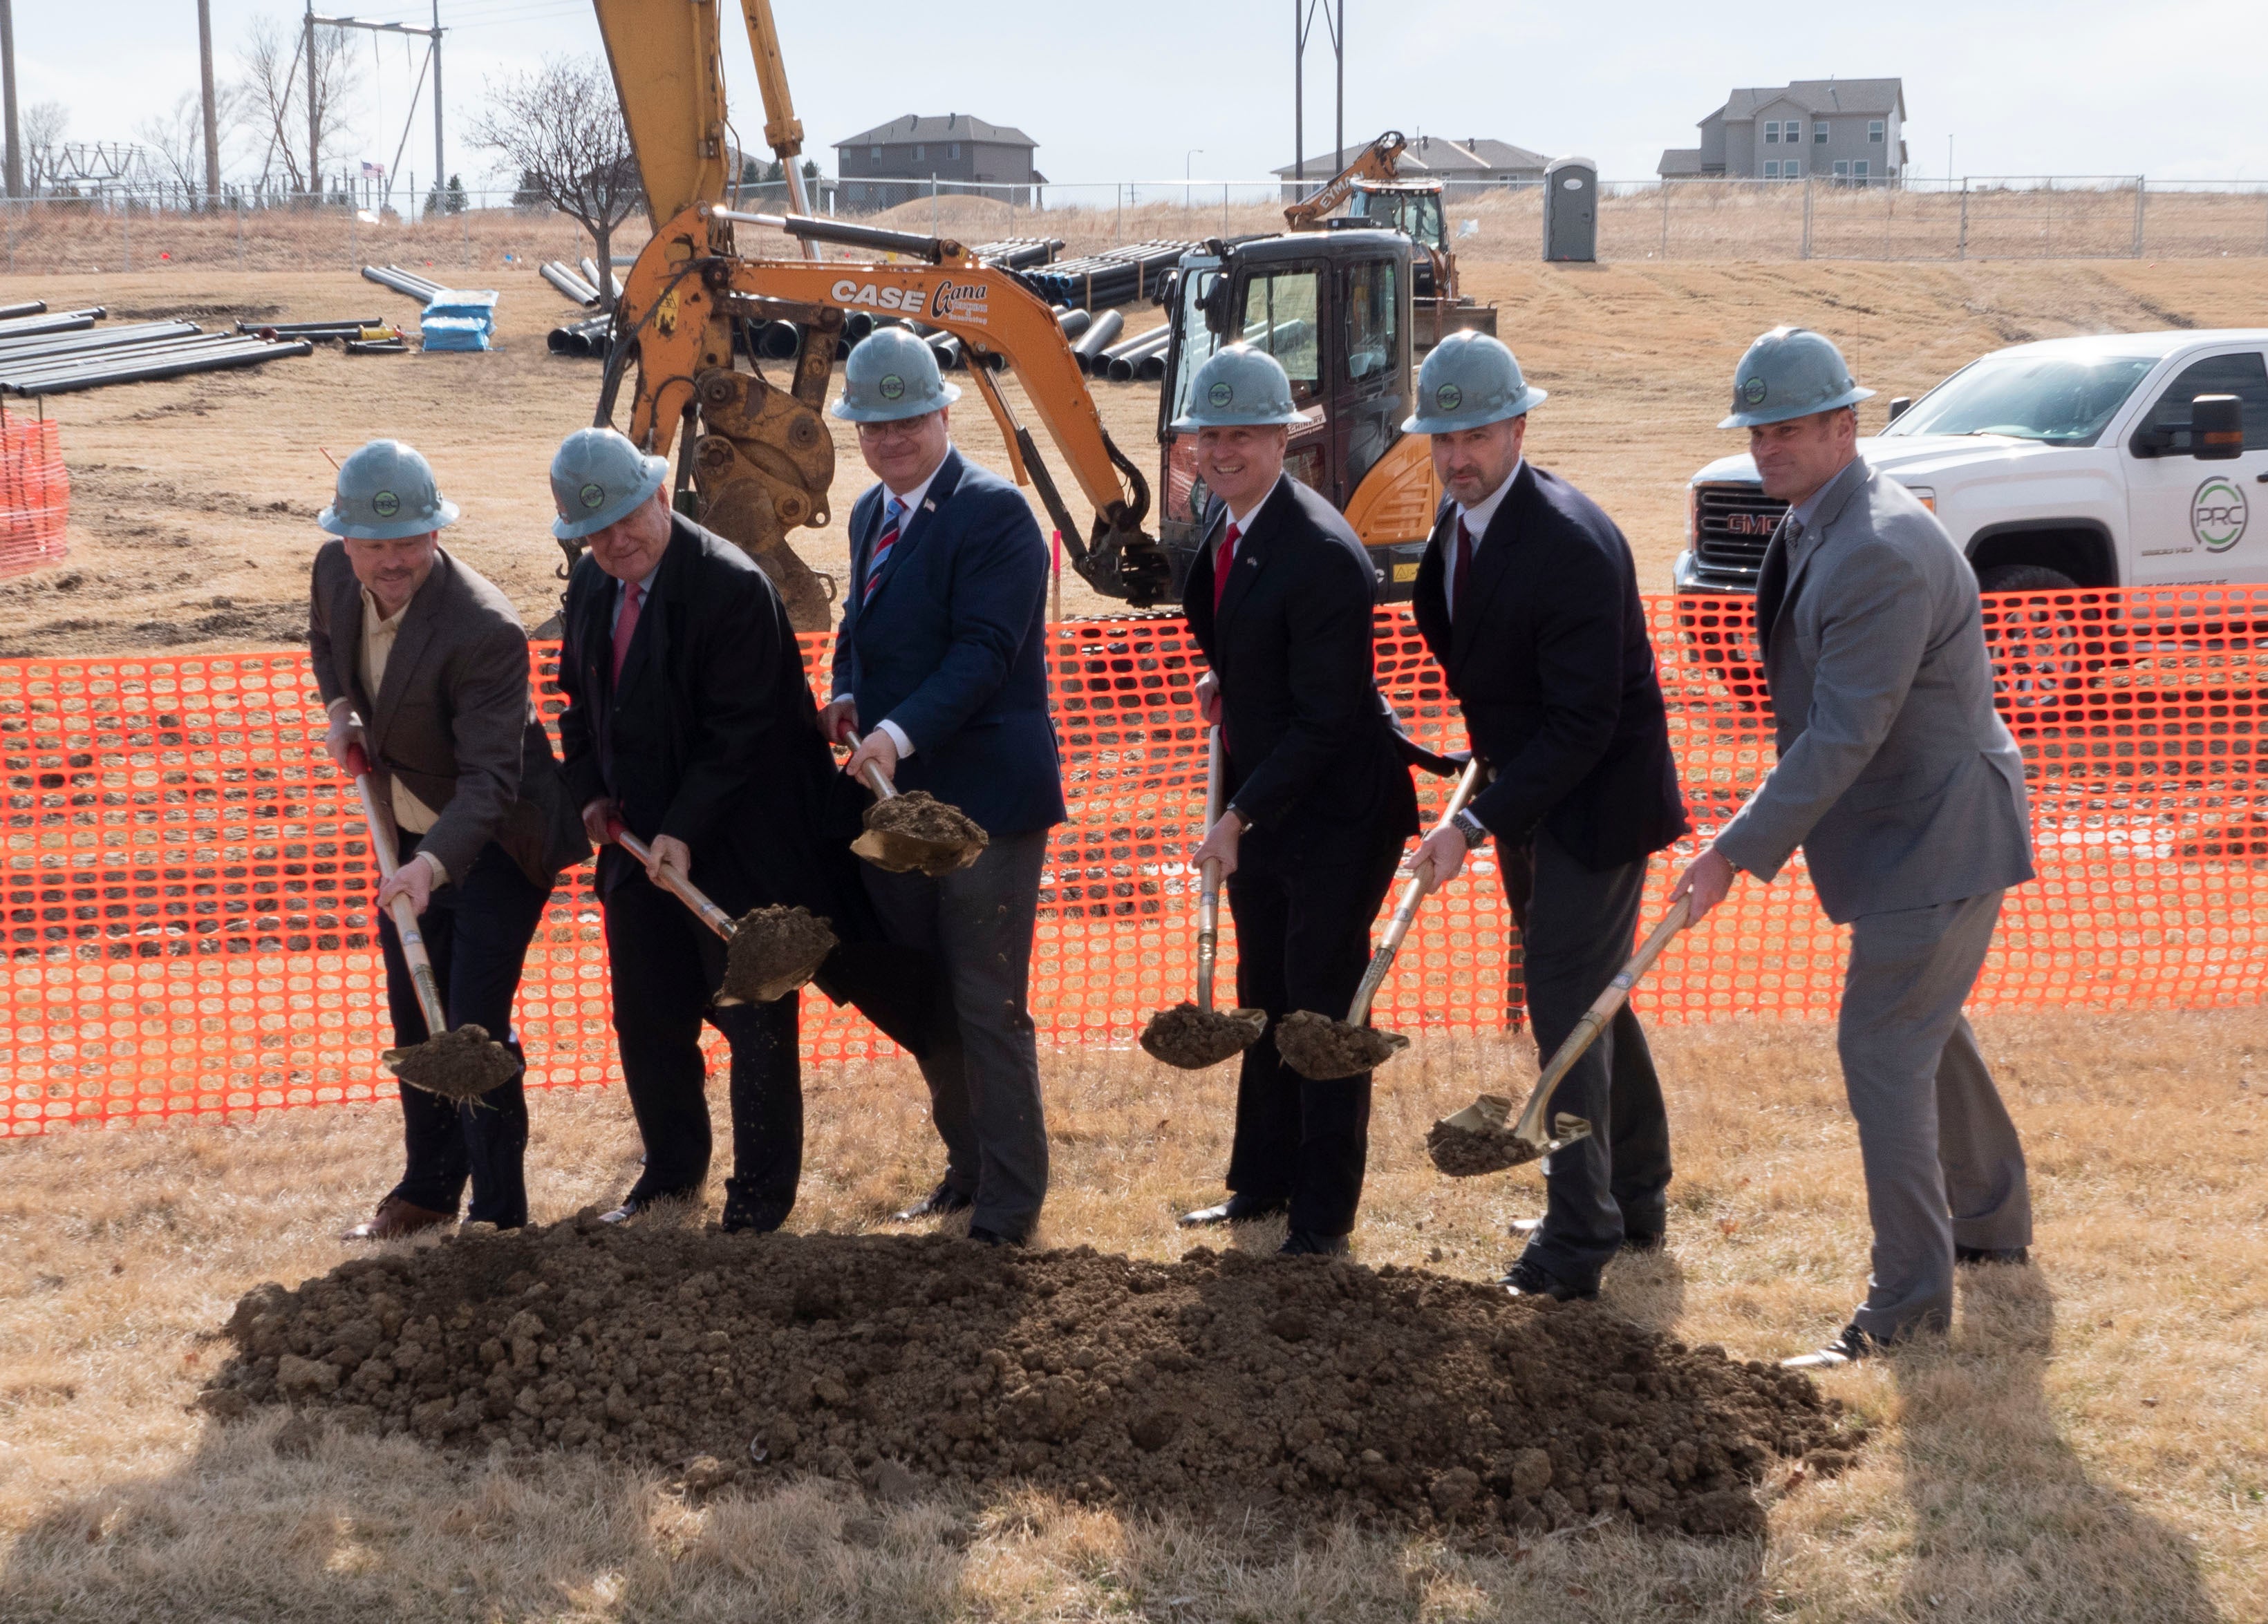 Breaking ground for the facility expansion, from left to right, are Perry Reid President and Partner Ben Velinsky, Veterans Homes’ Board Chair Jim Cada, NDVA Director John Hilgert, Governor Pete Ricketts, ENVH Administrator Matt Bauman, and DAS Director Jason Jackson. 